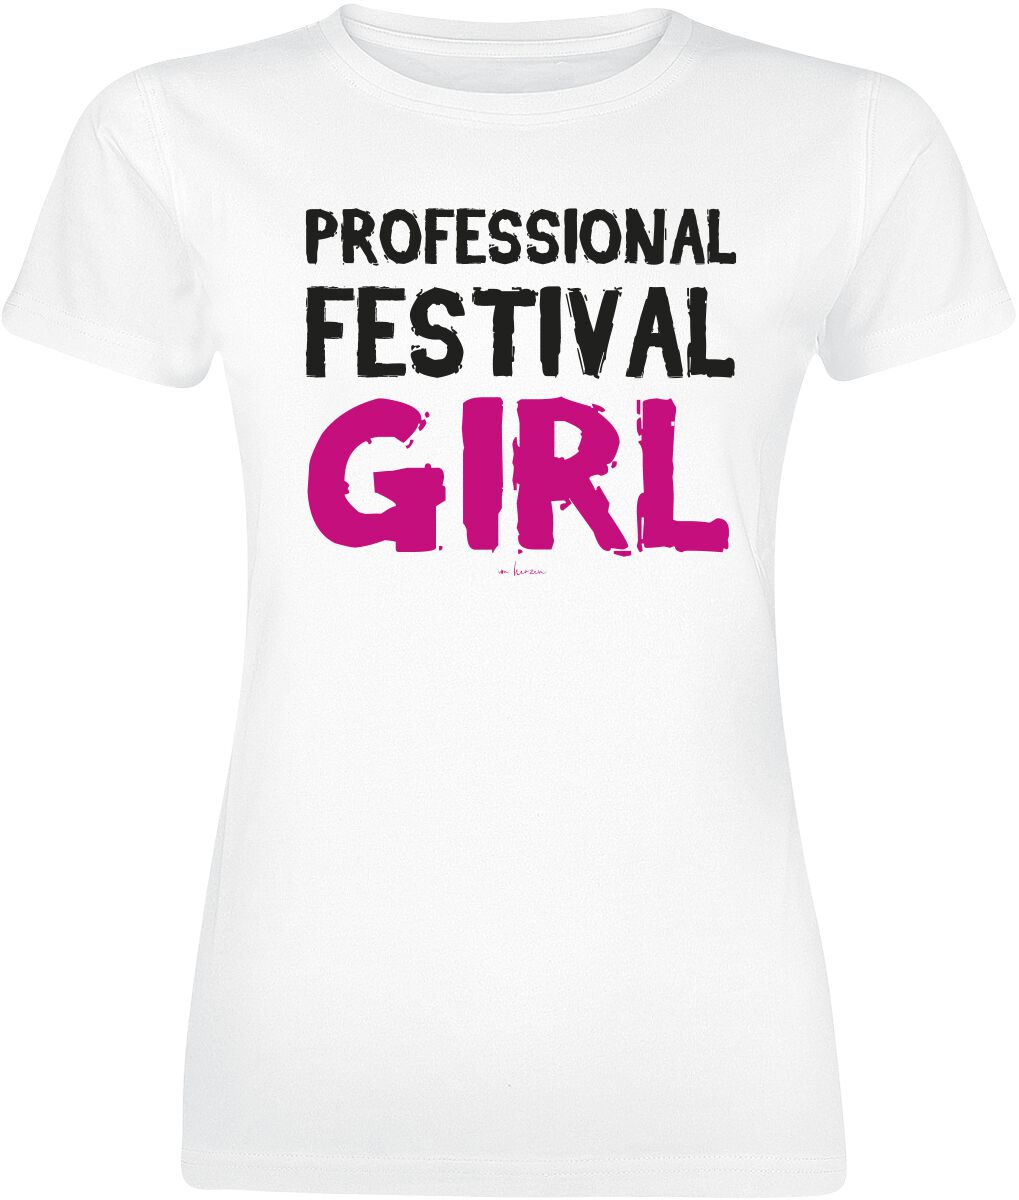 Alcohol & Party Professional Festival Girl T-Shirt white